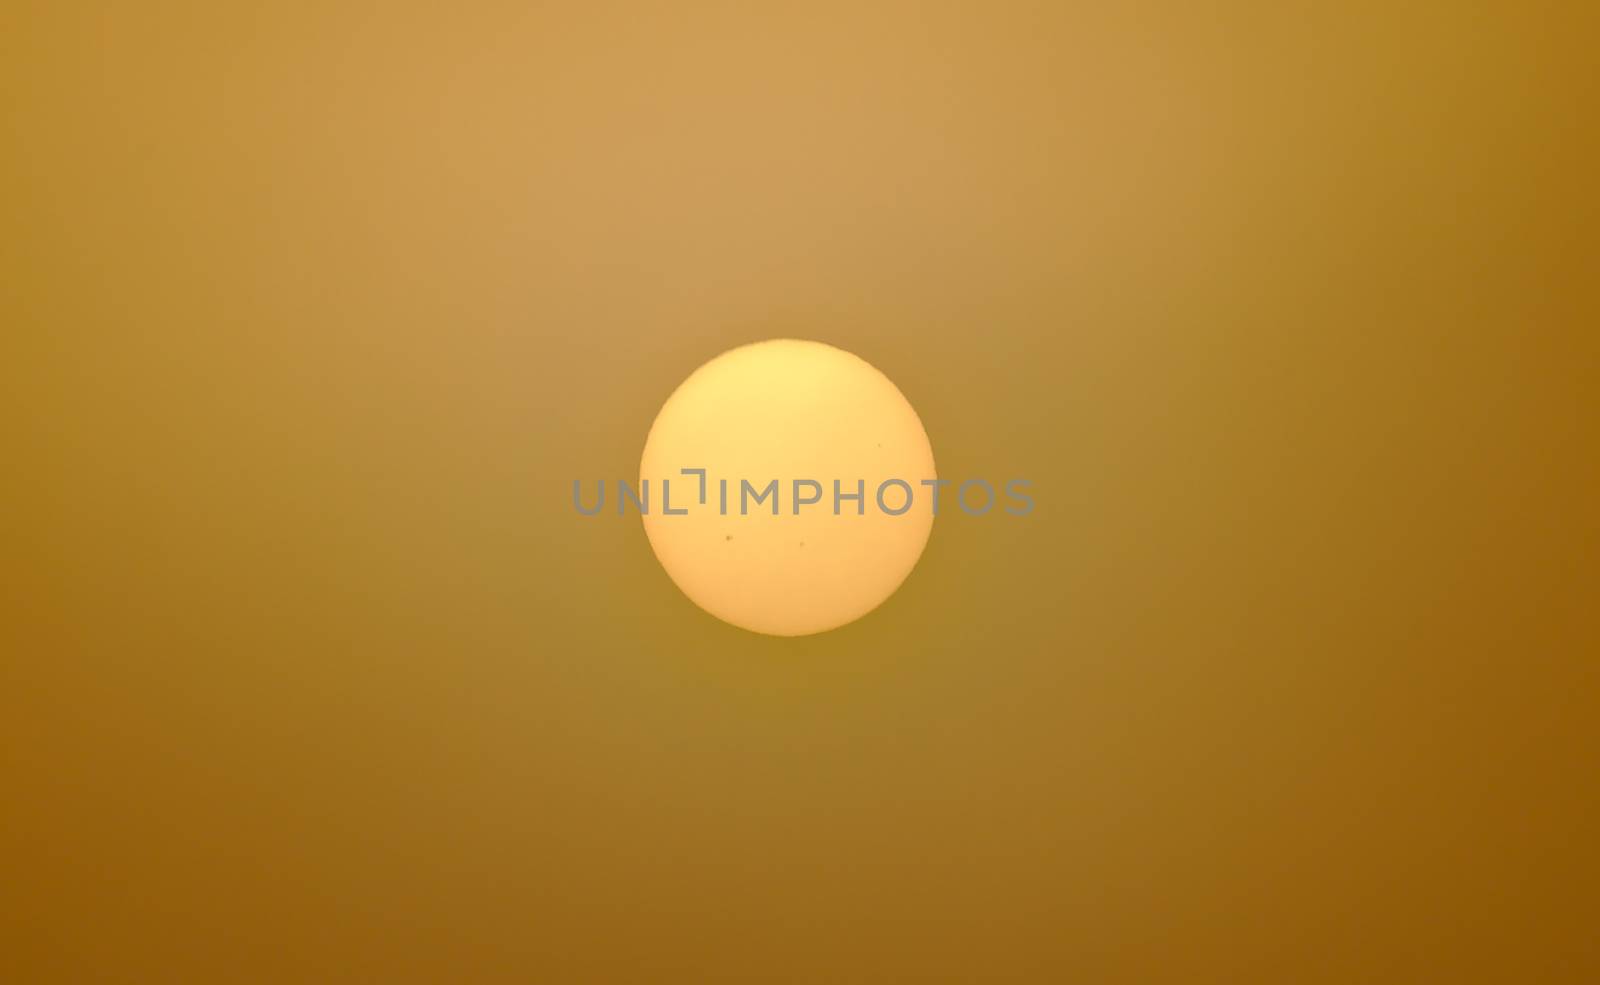 Dark yellow sun shining through misty air. Air pollution has reduced the brightness of the sun so it can be watched even without sunglasses.